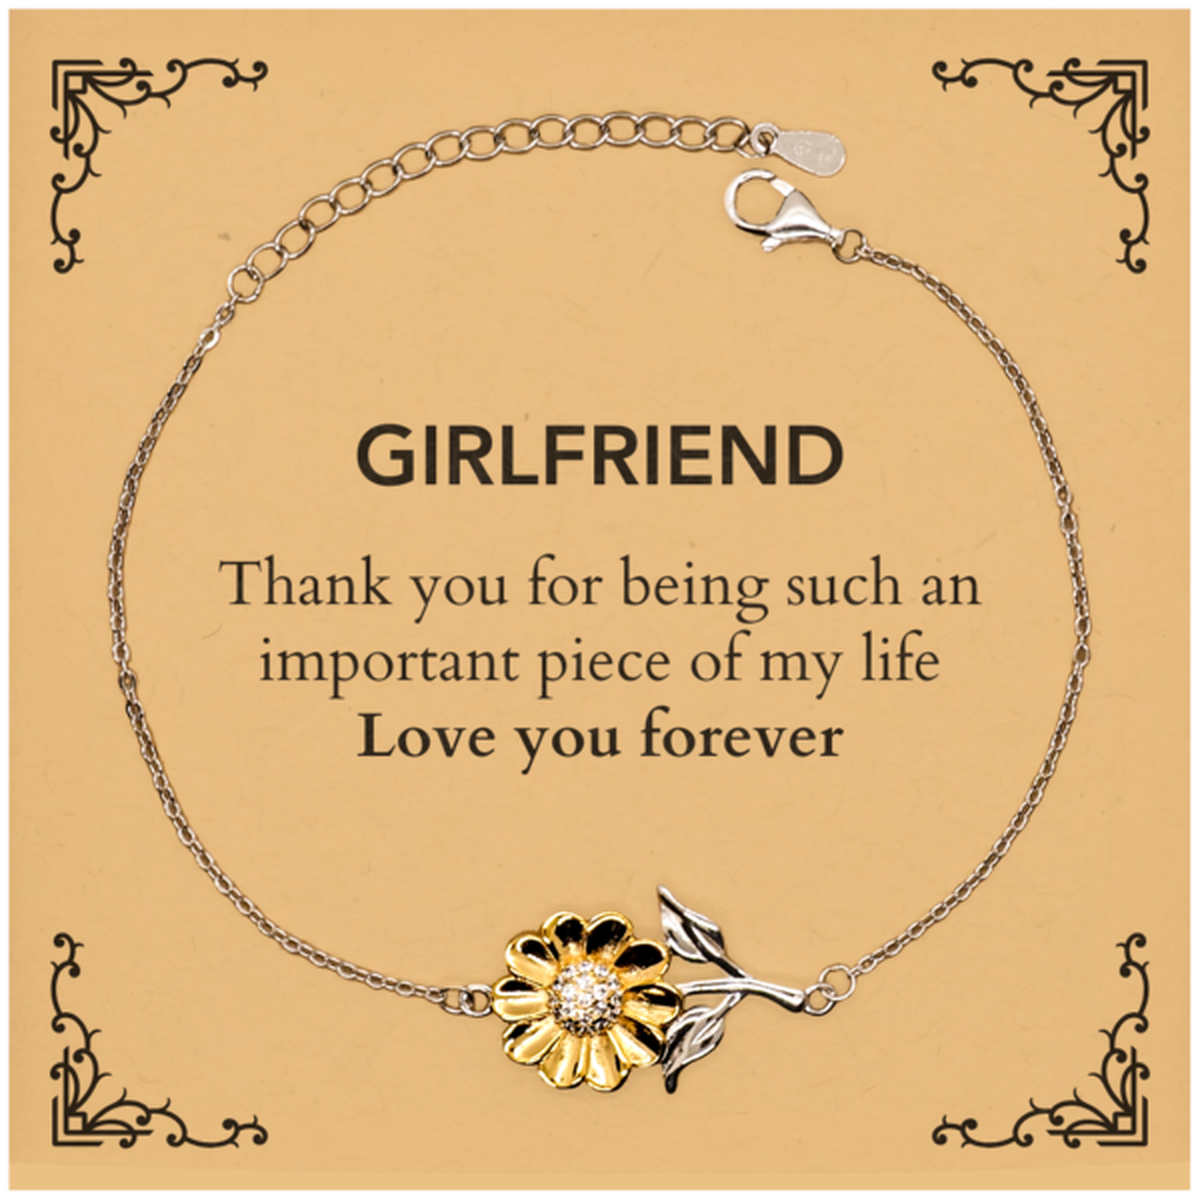 Appropriate Girlfriend Sunflower Bracelet Epic Birthday Gifts for Girlfriend Thank you for being such an important piece of my life Girlfriend Christmas Mothers Fathers Day